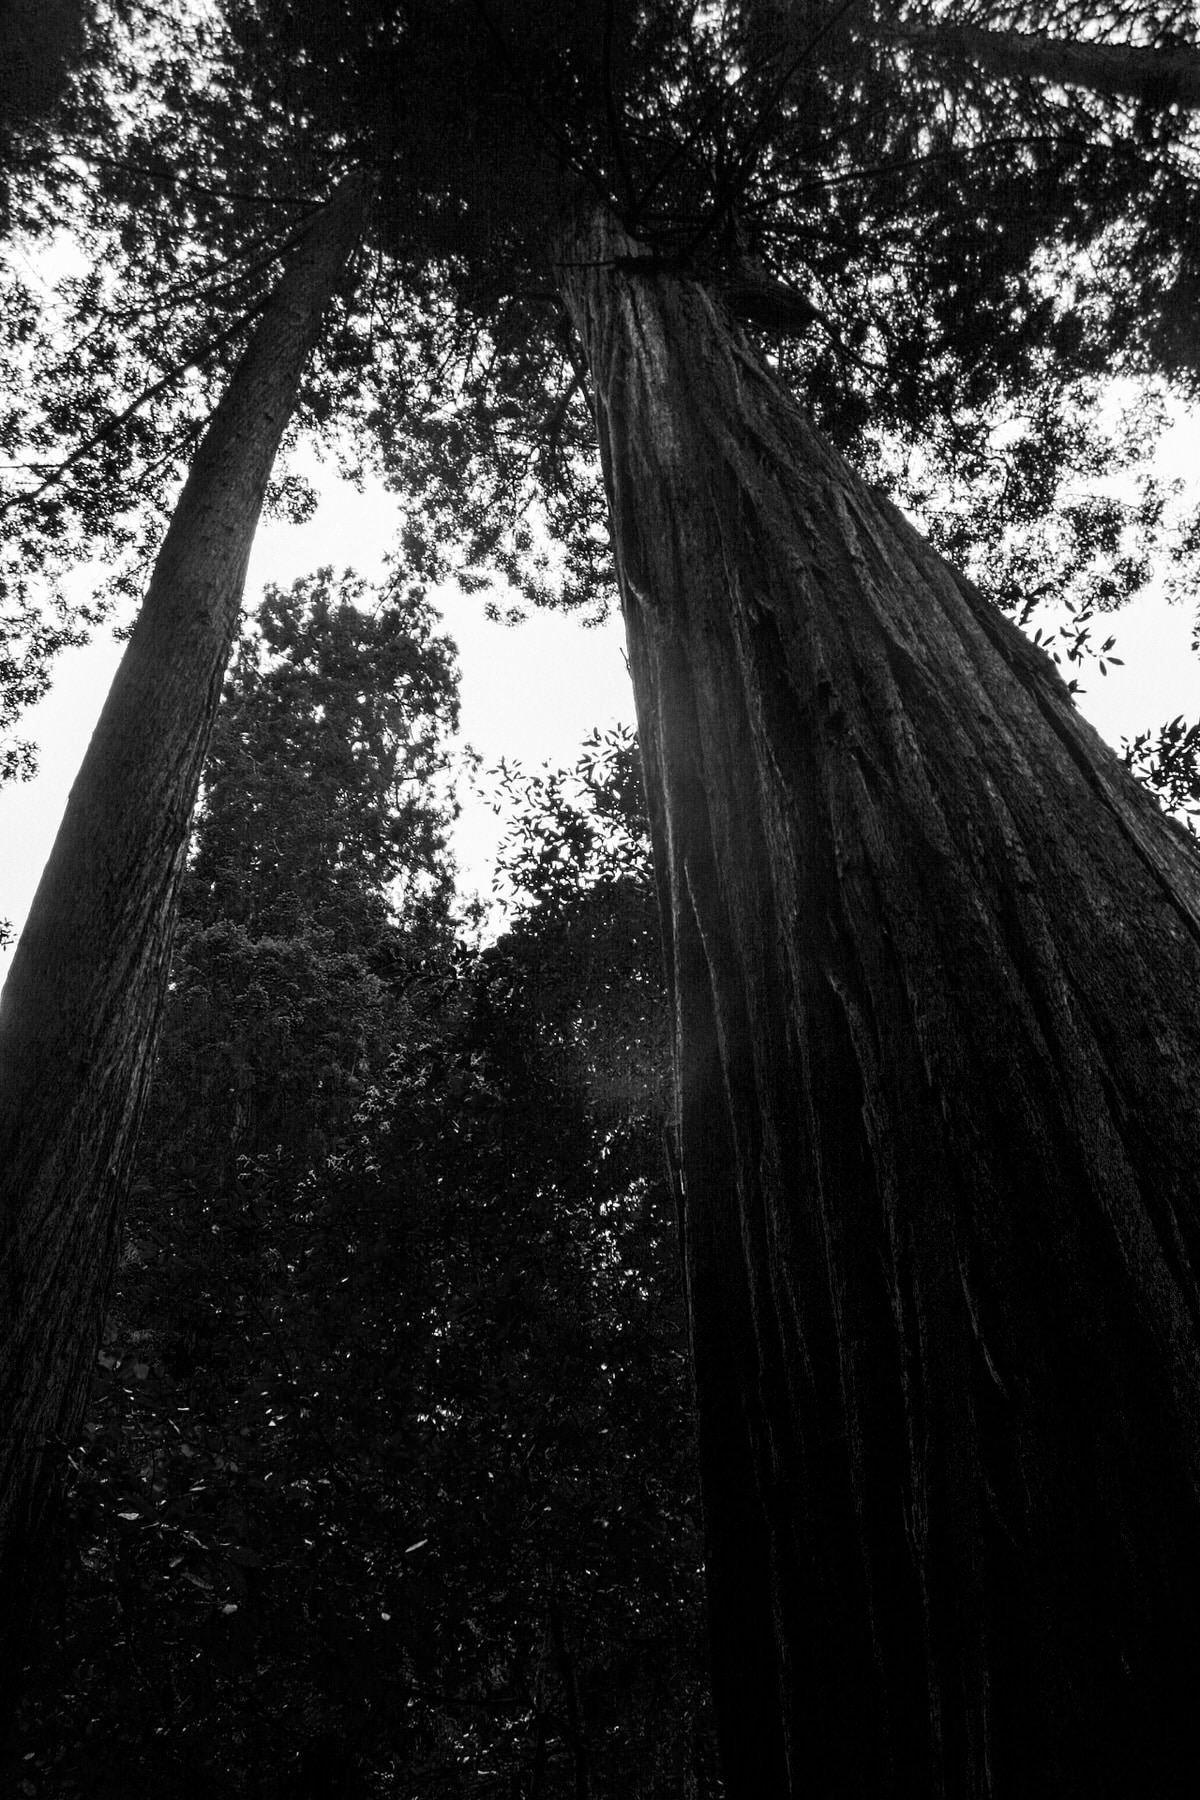 Muir-Woods-National-Monument-California-black-and-white-fine-art-photography-by-Studio-L-photographer-Laura-Schneider-_3588